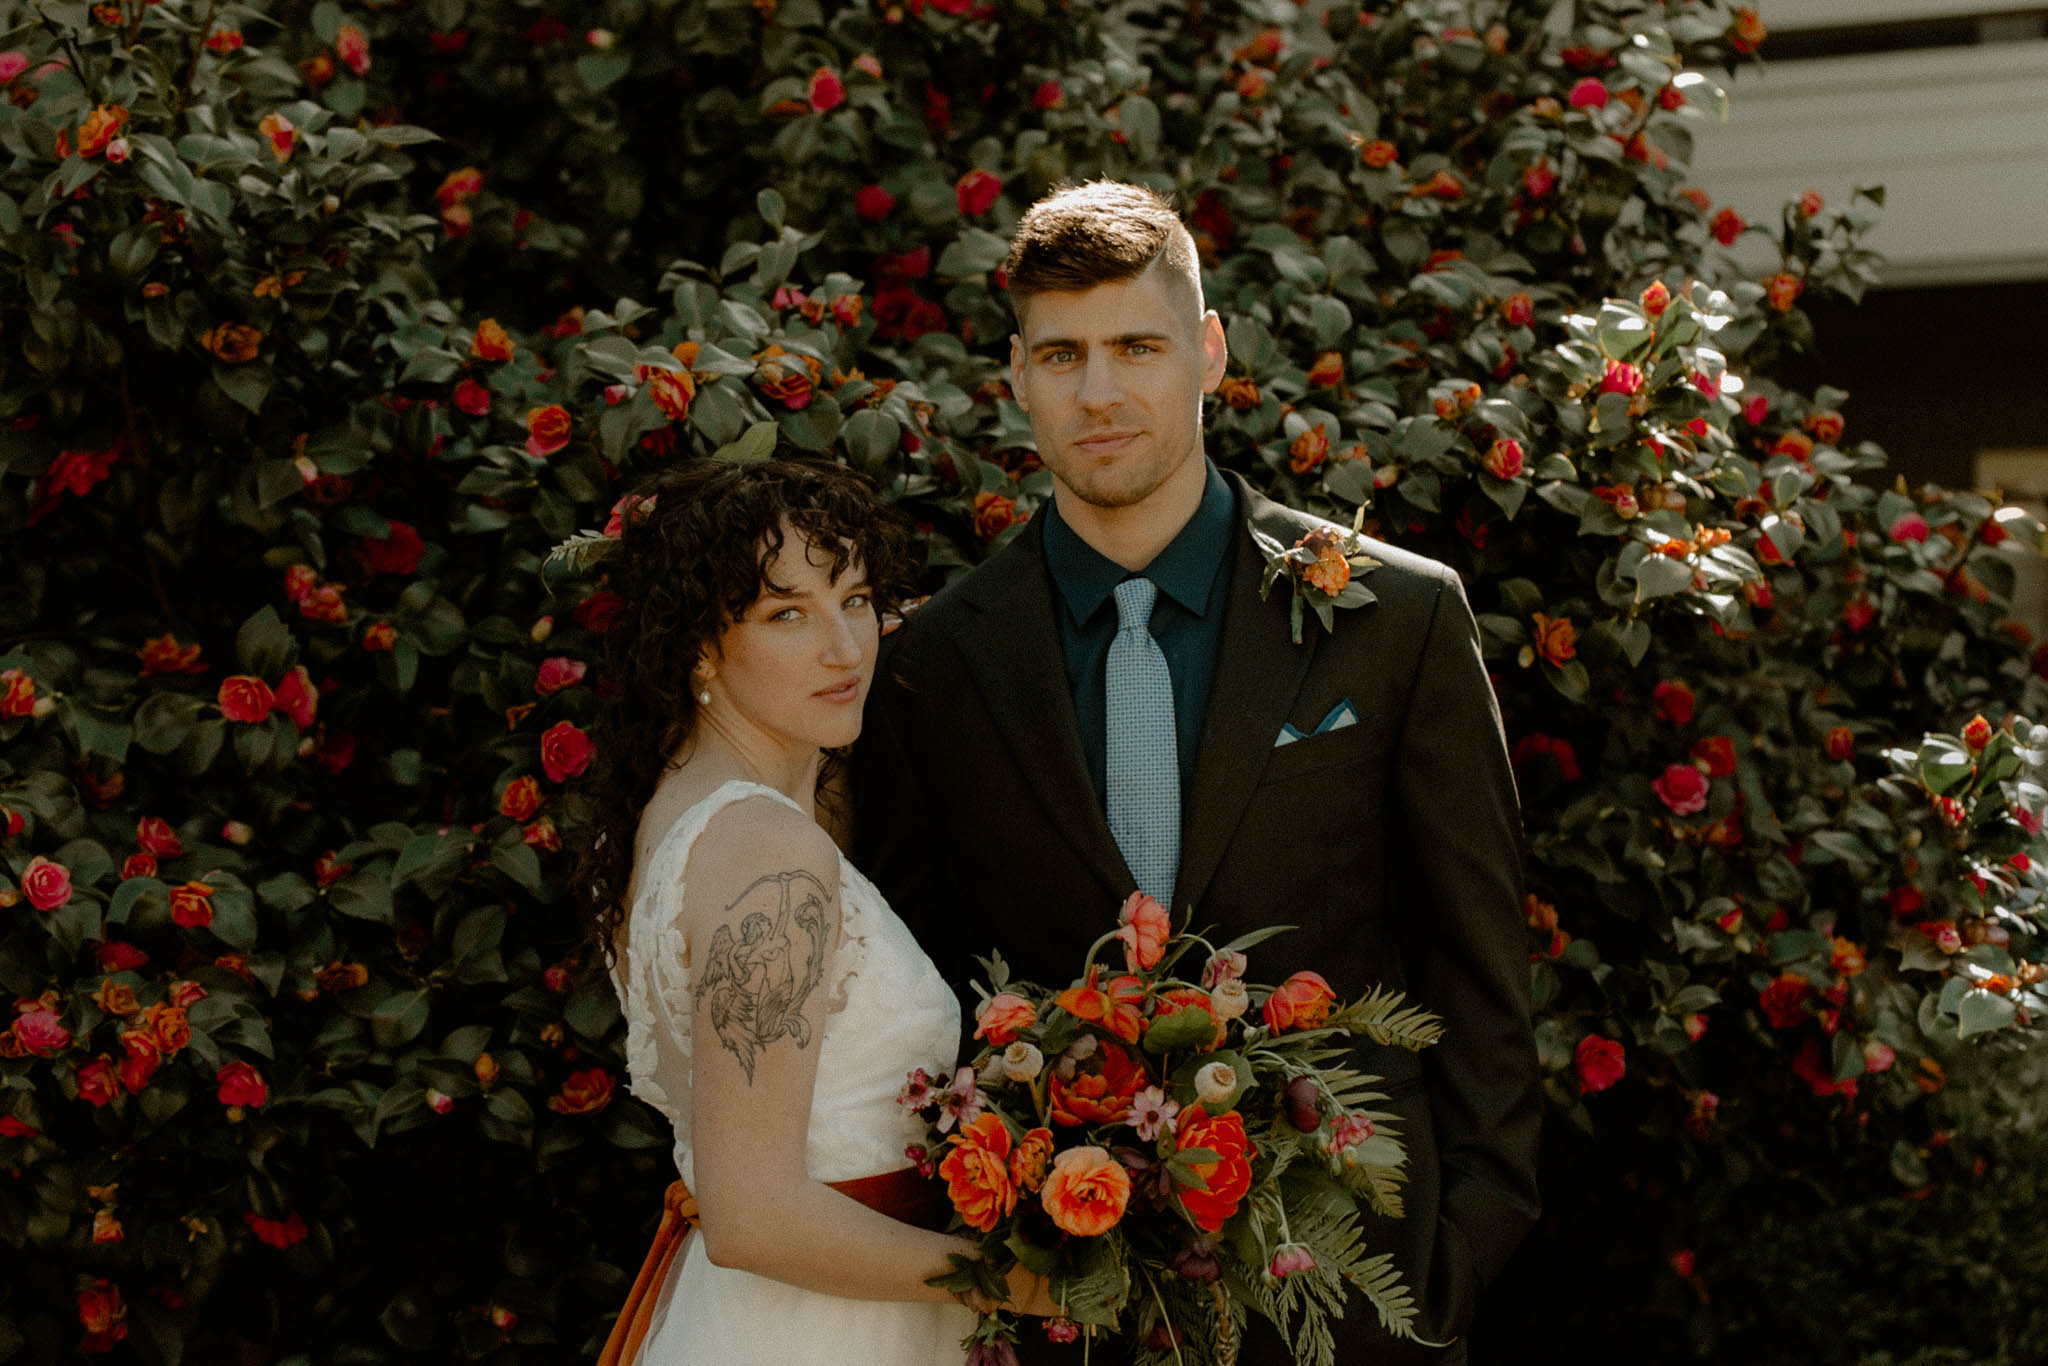 Non-traditional Port Townsend elopement